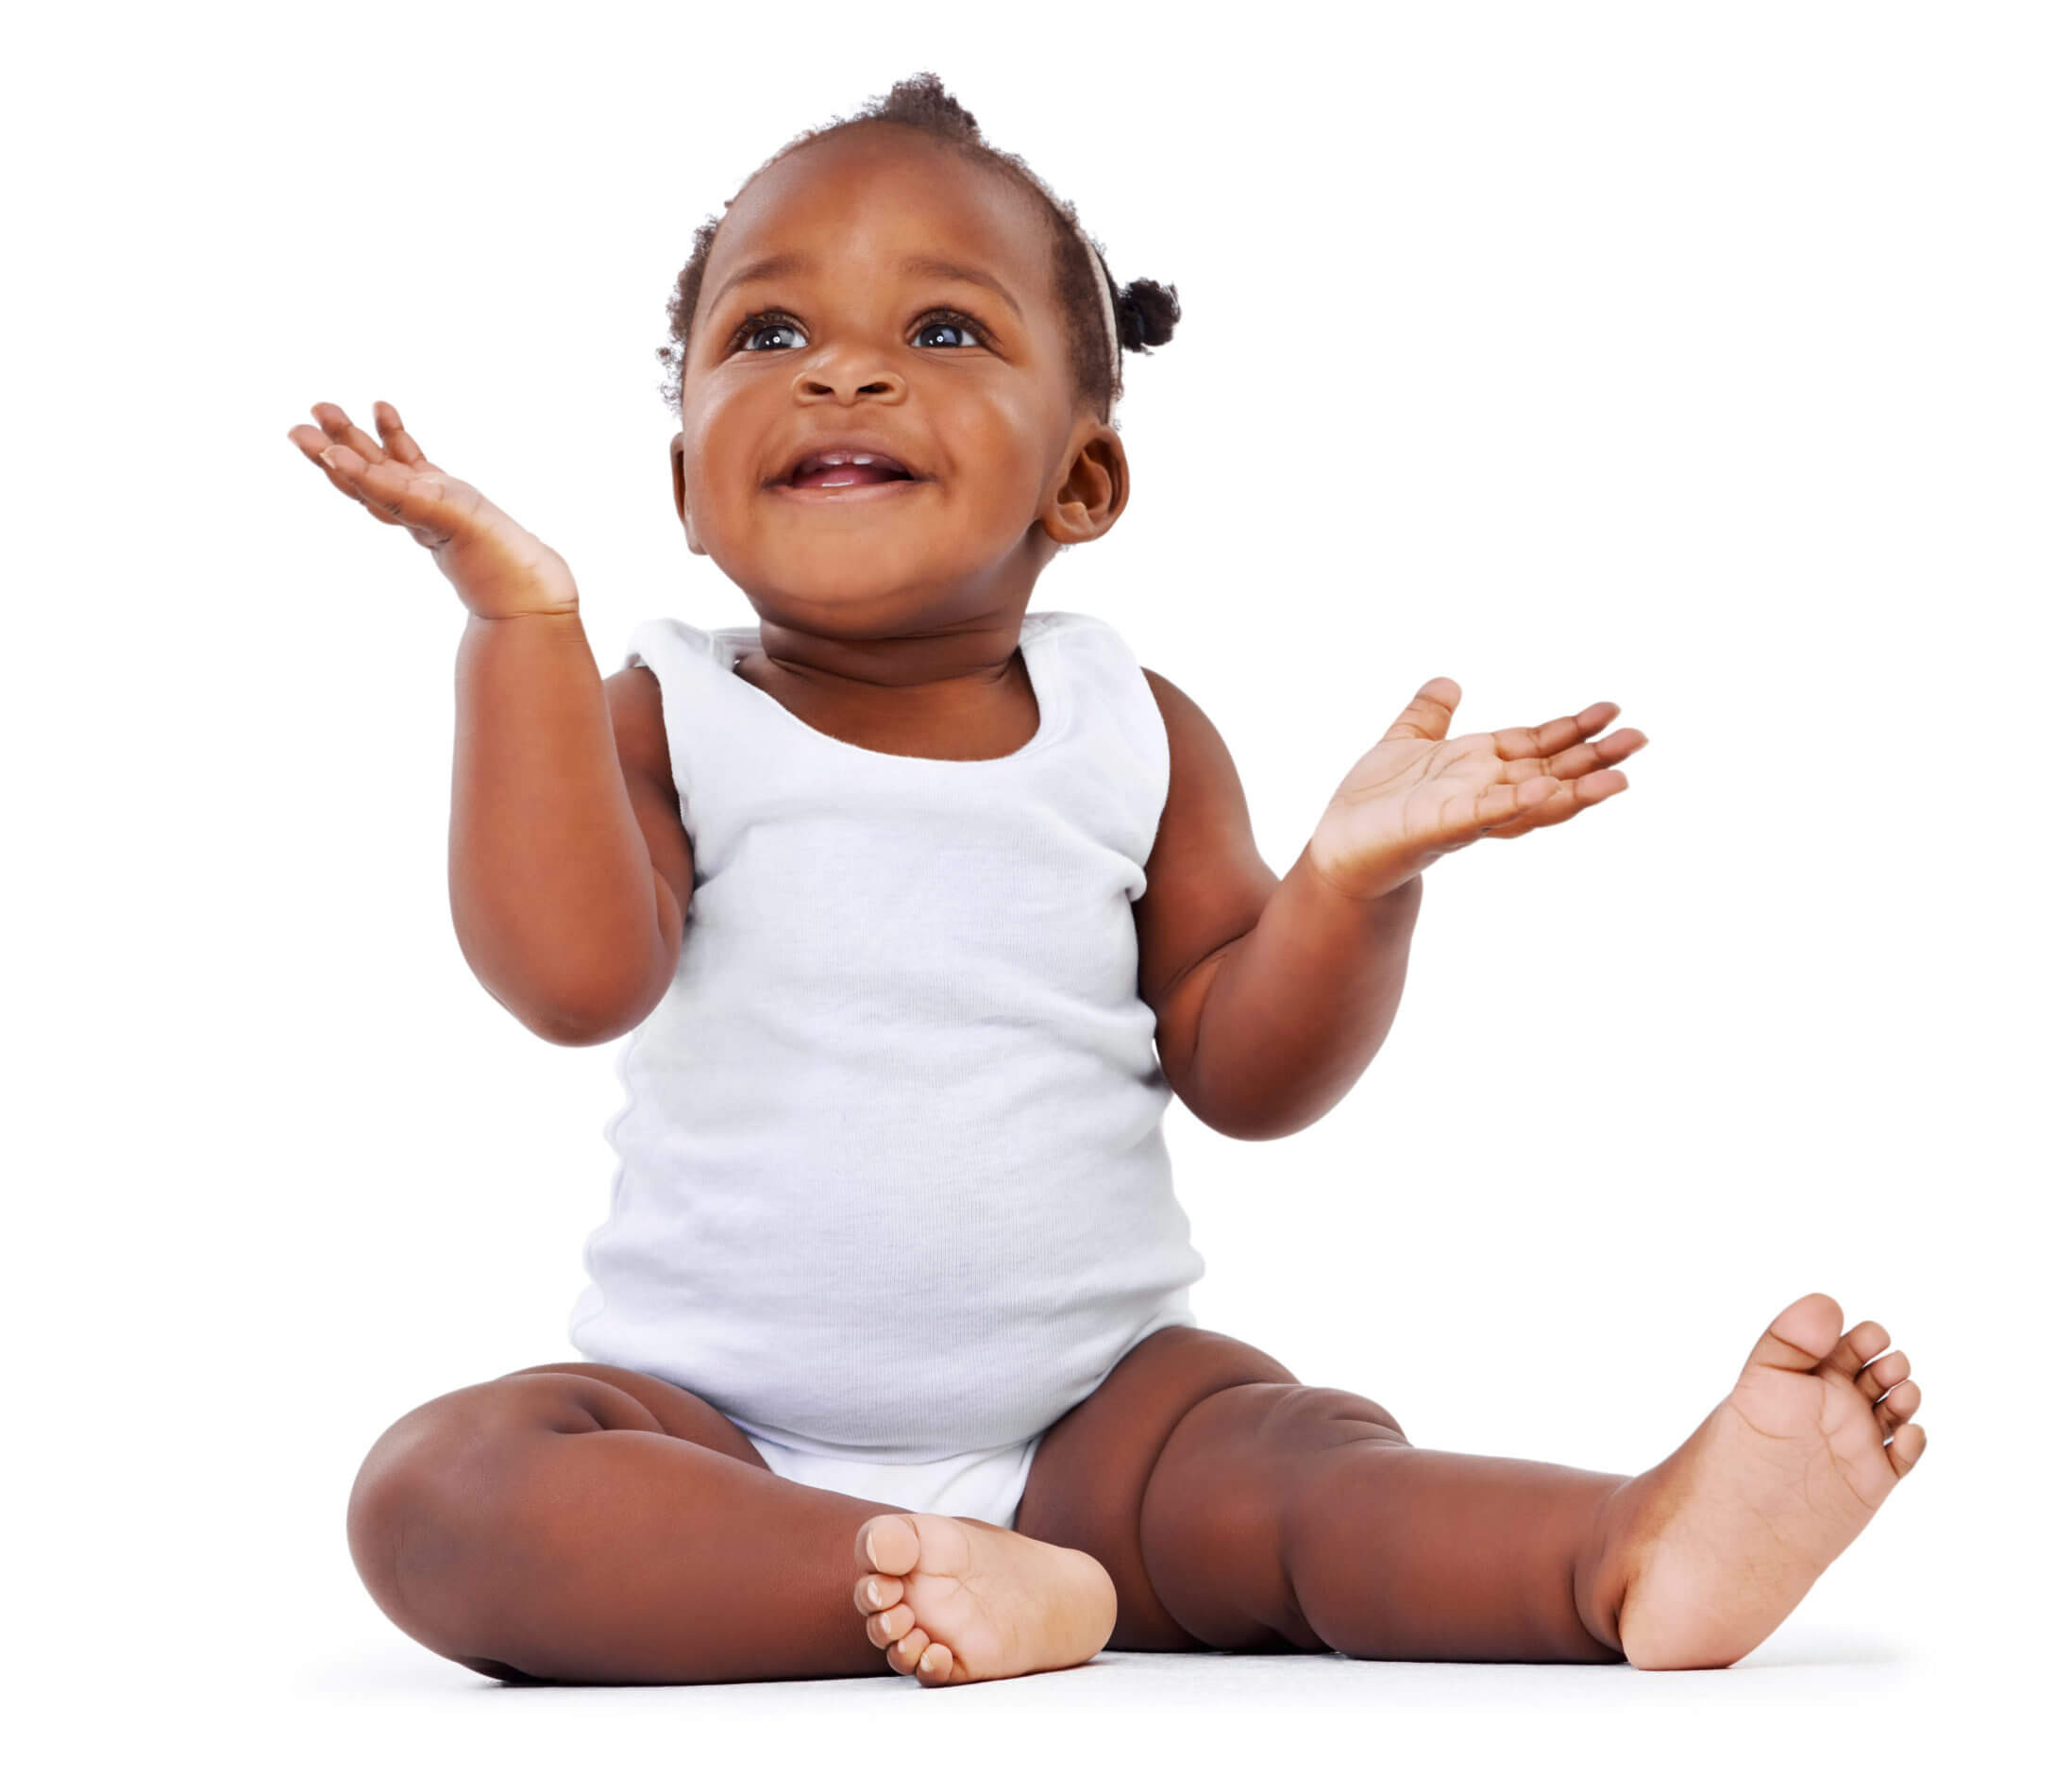 Dark skin toned baby girl wearing a white onesie smiling holding her hands up.